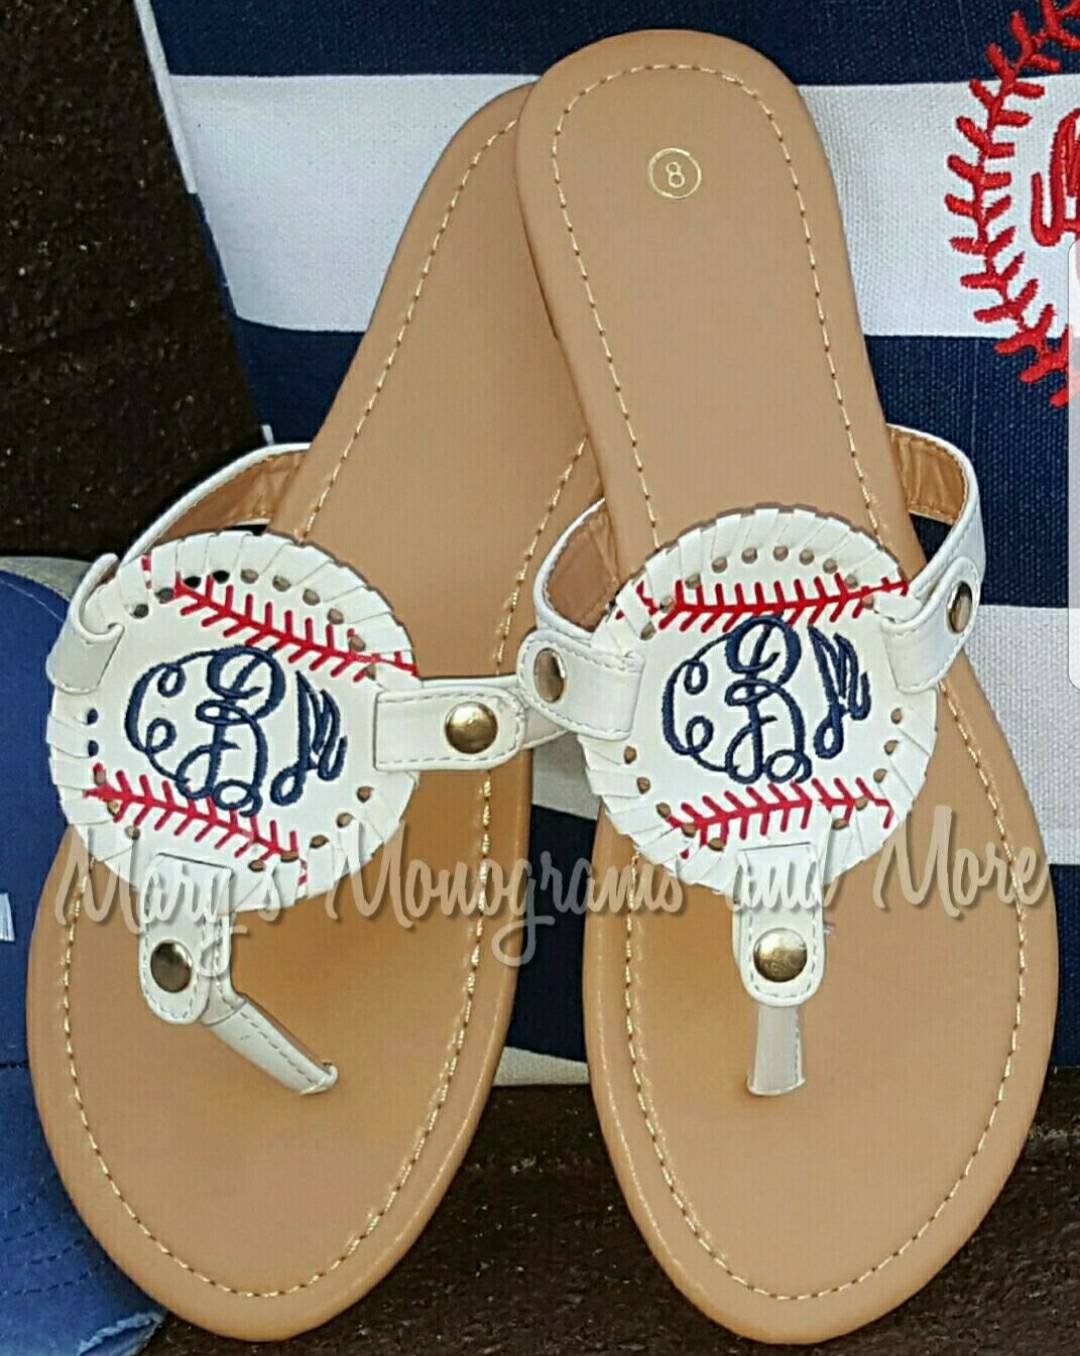 Monogrammed Disc Medallions (Discs Only)  Embroidered Discs, Interchangeable Discs, Lily, Solid, and Baseball Discs - Sandals Not Included